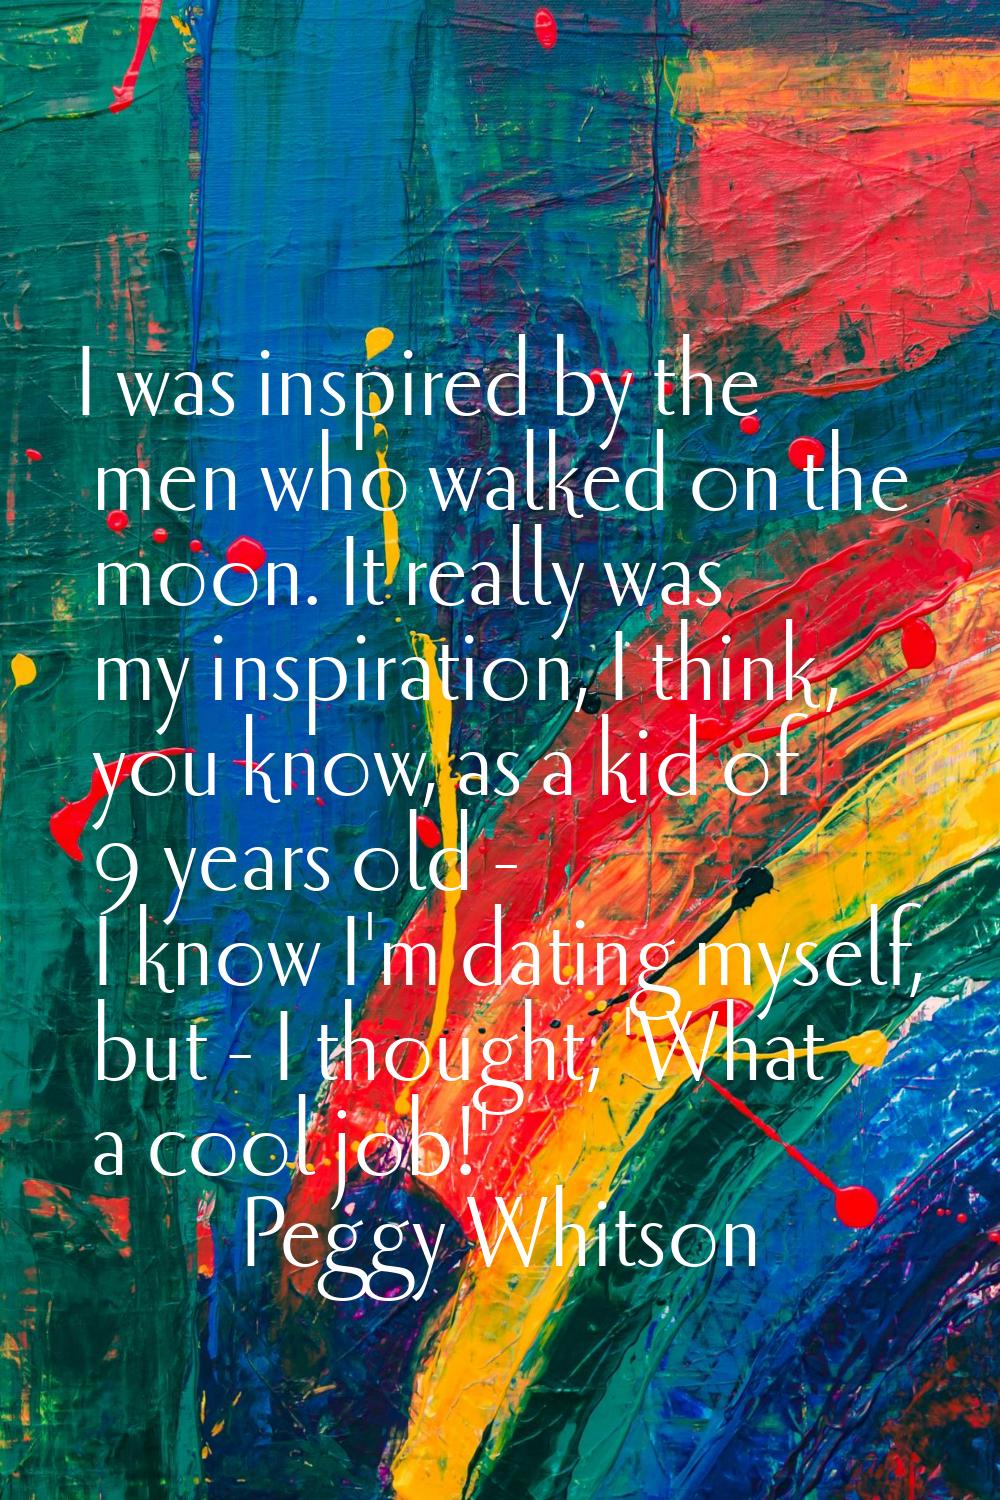 I was inspired by the men who walked on the moon. It really was my inspiration, I think, you know, 